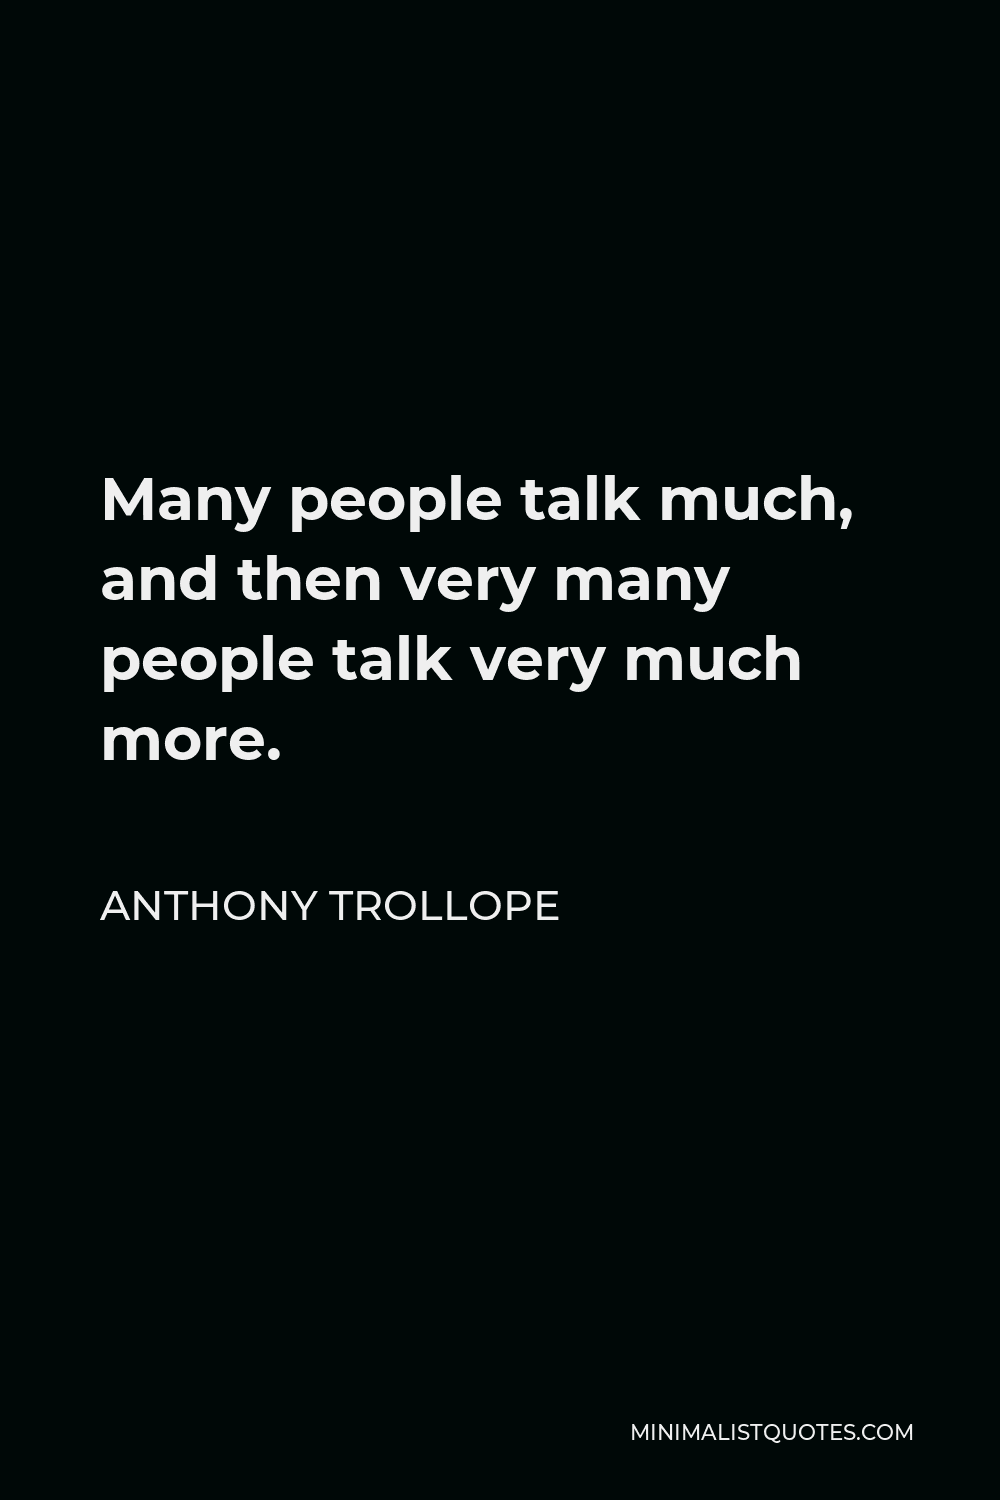 Anthony Trollope Quote - Many people talk much, and then very many people talk very much more.